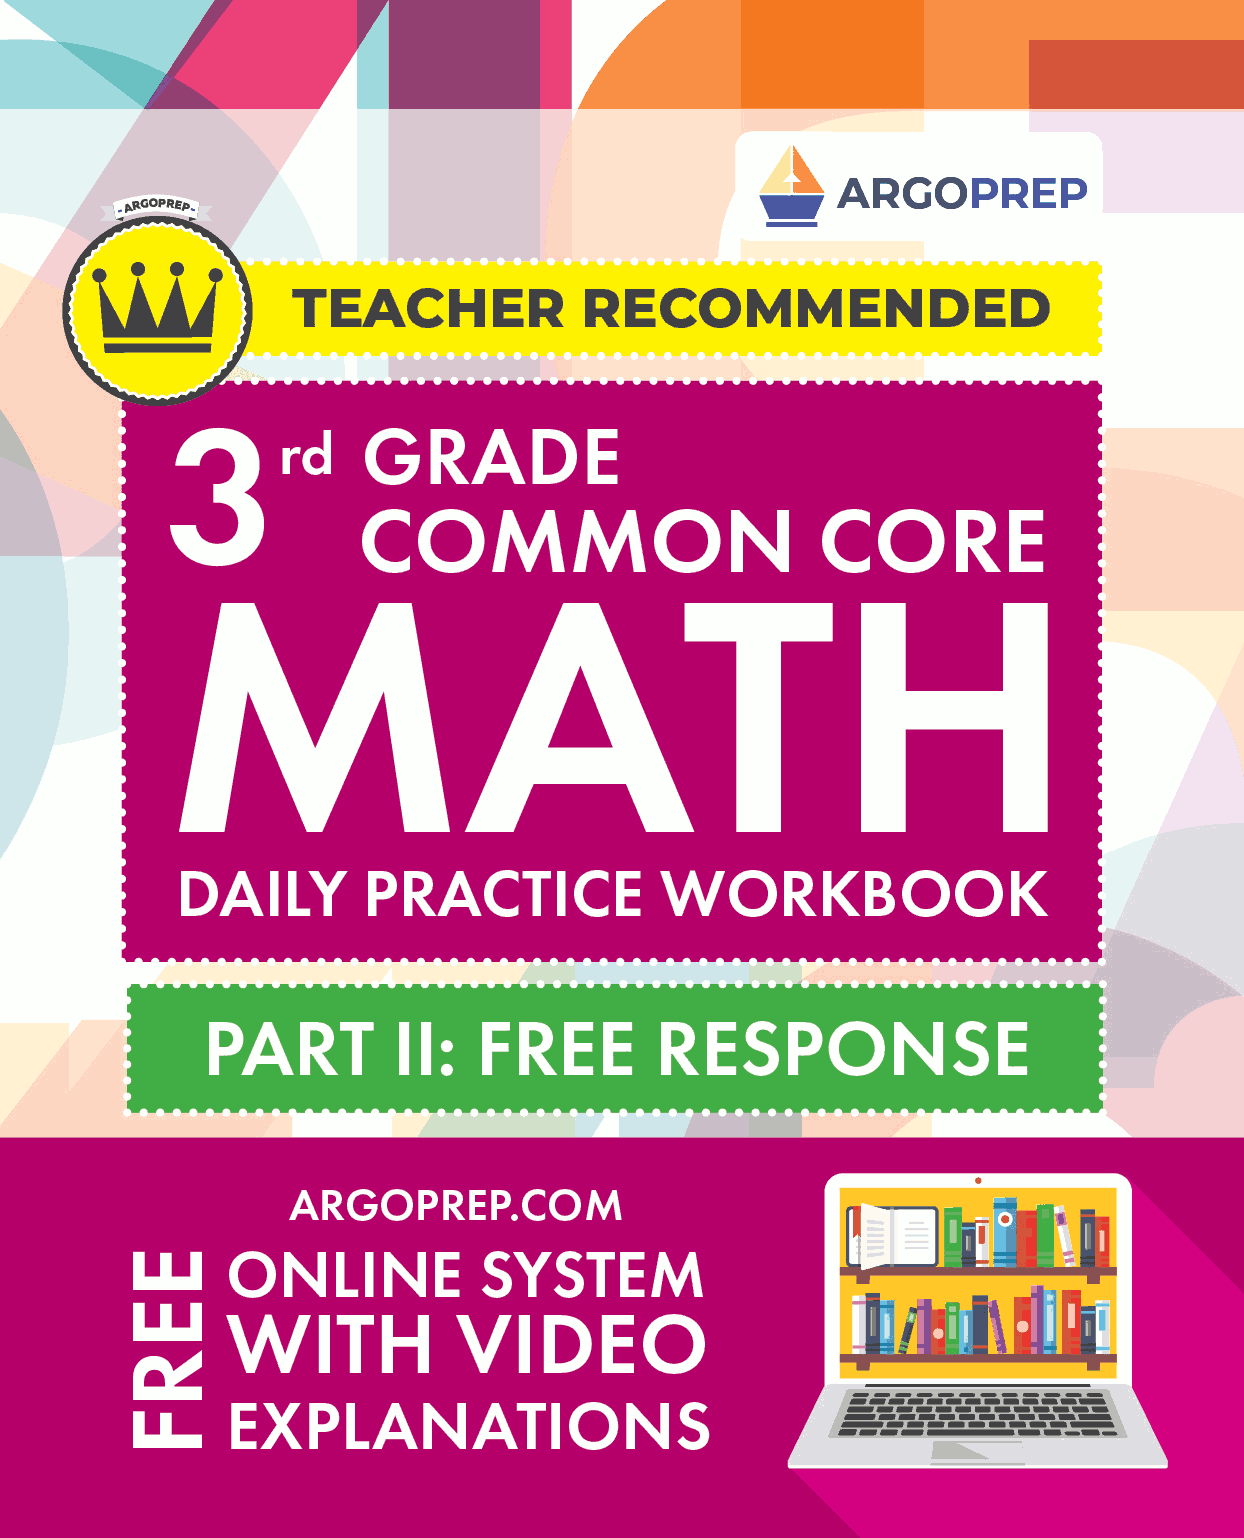 3rd-grade-common-core-math-daily-practice-workbook-part-ii-free